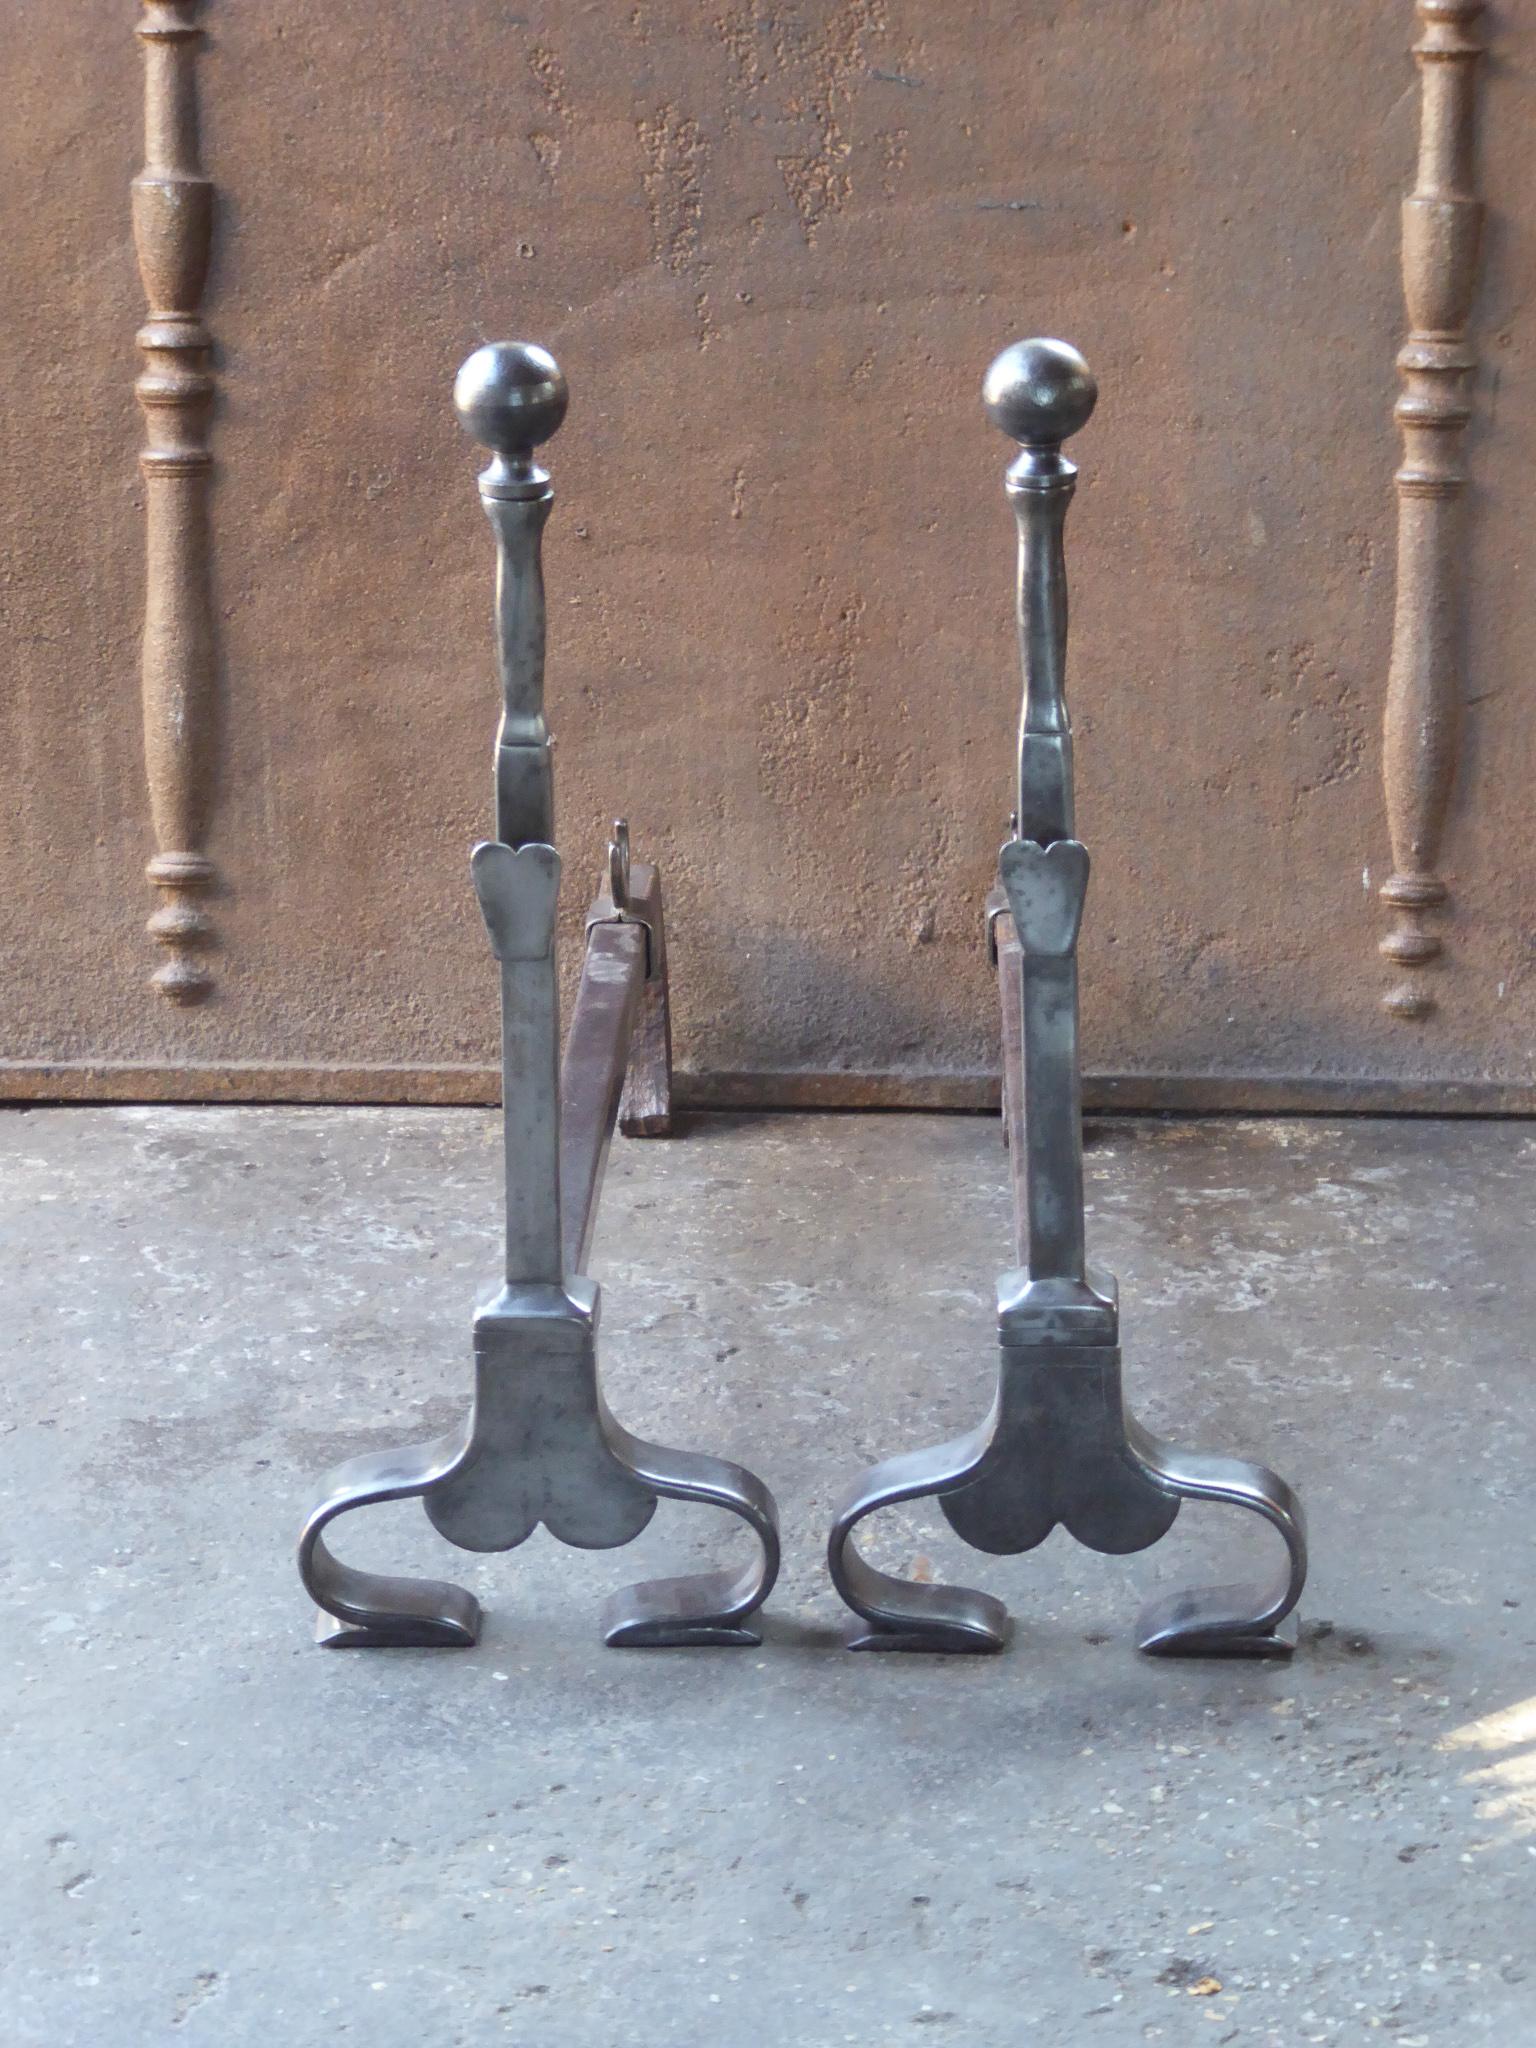 Late 19th or Early 20th century French Art Nouveau andirons made of wrought iron. The andirons have spit hooks to grill food. The condition is good.